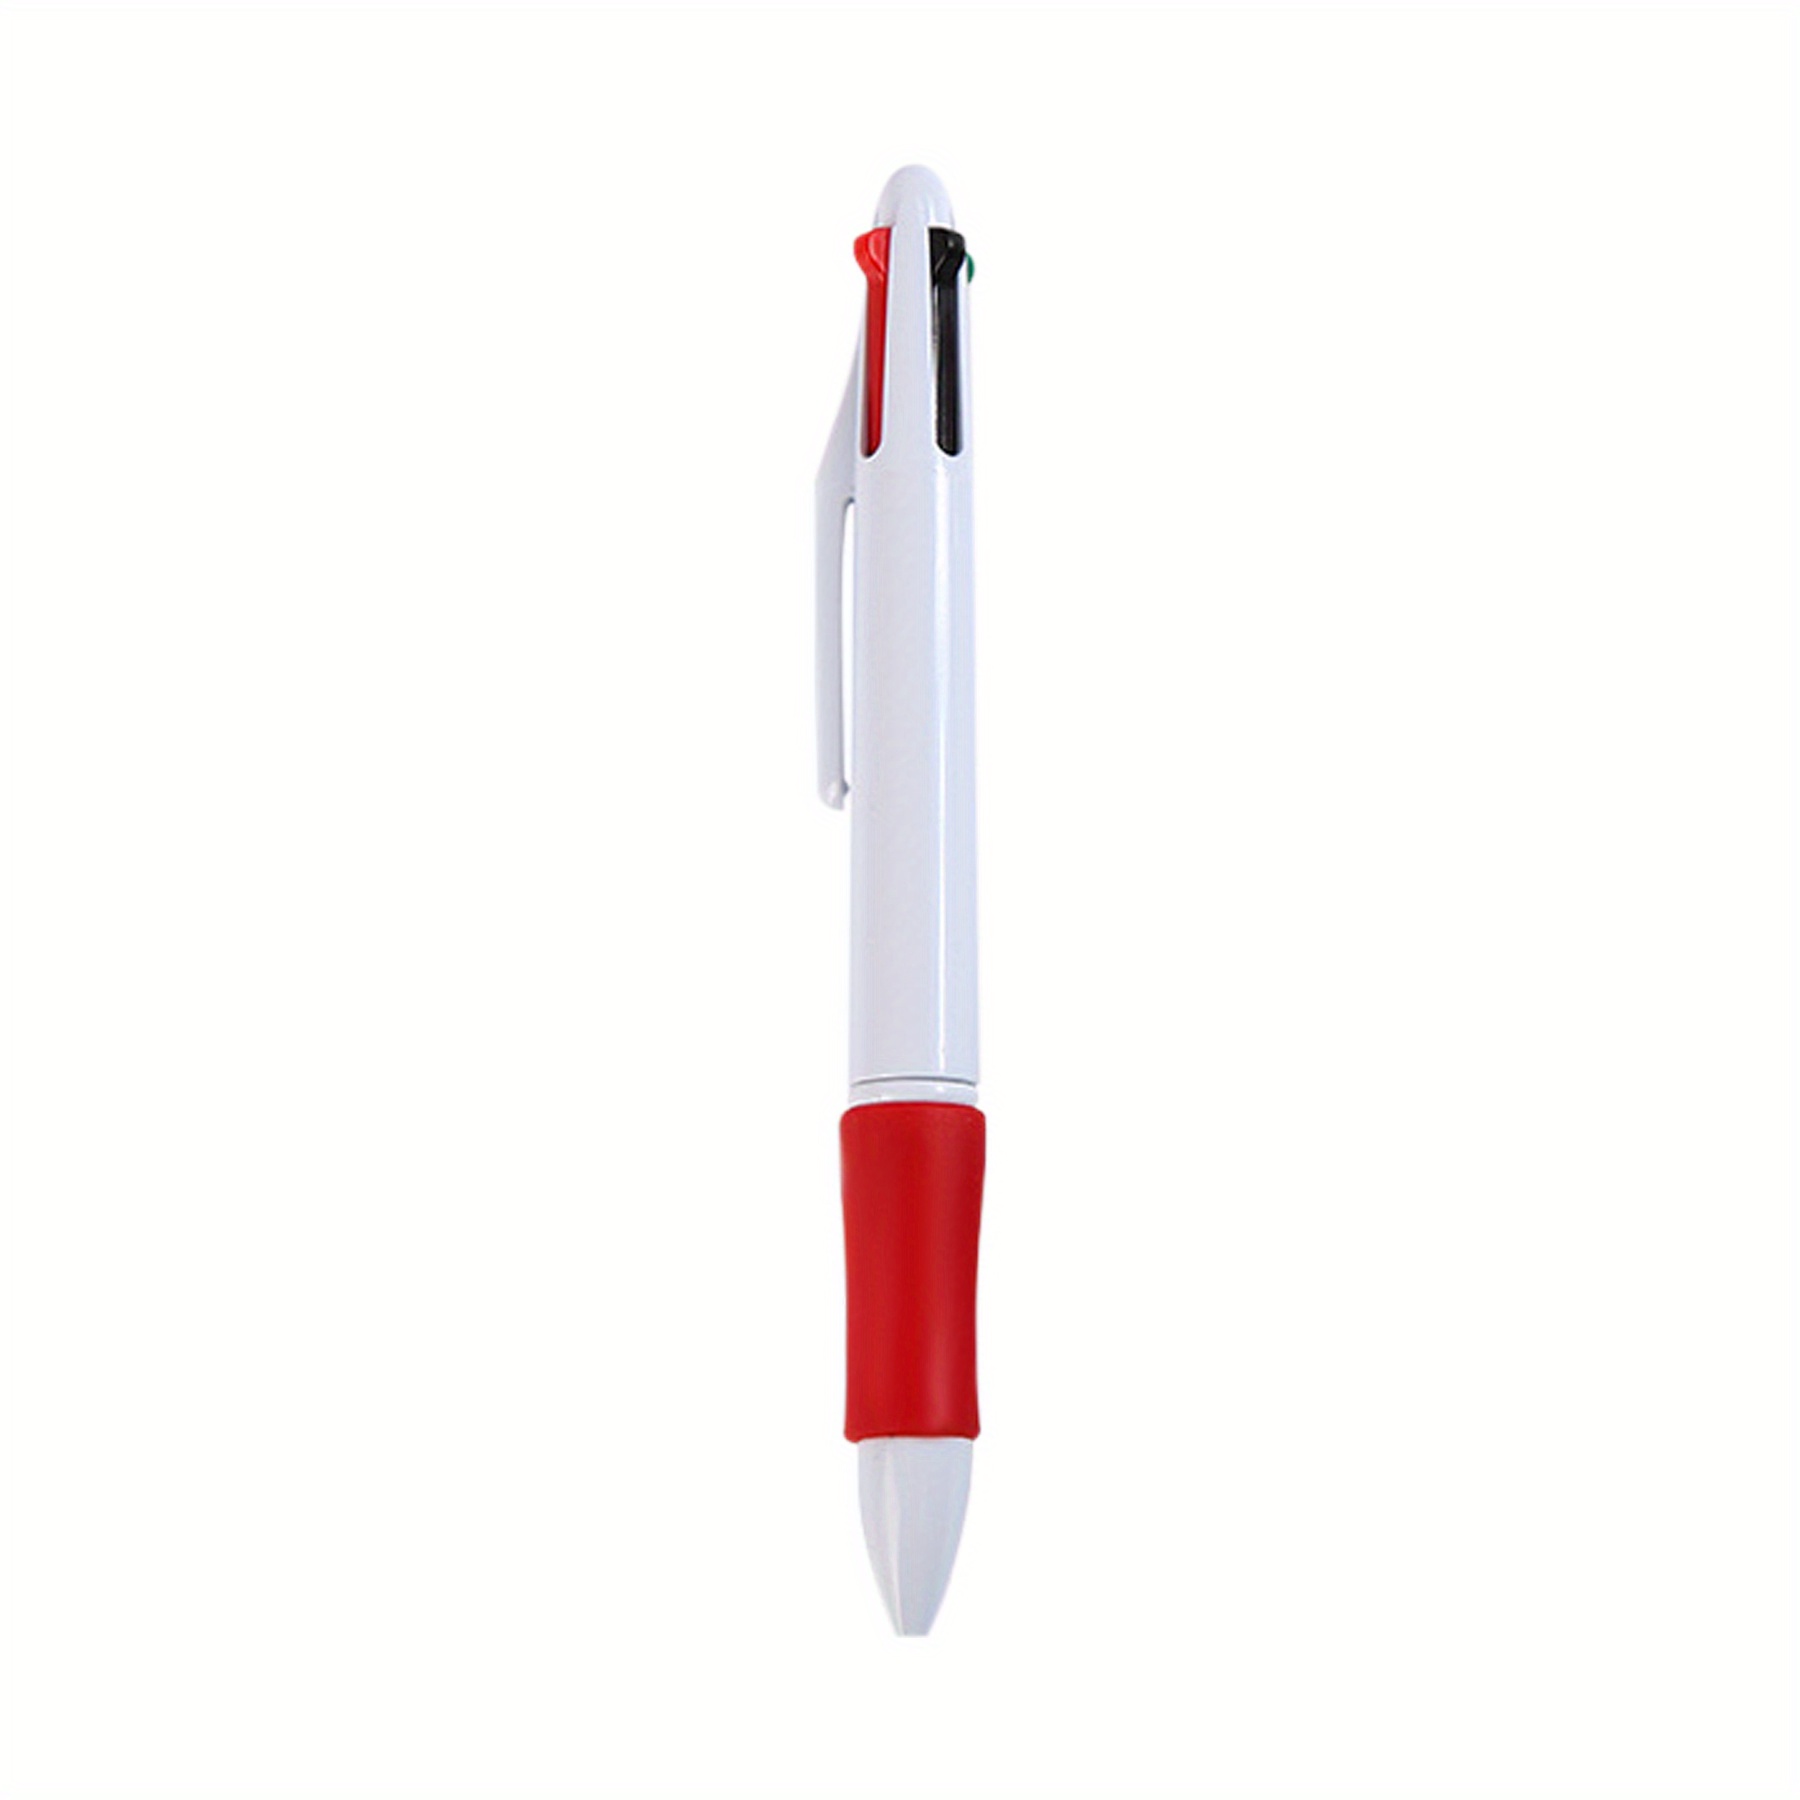 Reopen 4 in 1 Multicolor Pen, Portable Metal Cased Multifunctional Refillable&Retractable Ballpoint Pen with Gift Box, Mechanical Pencil, Black Red